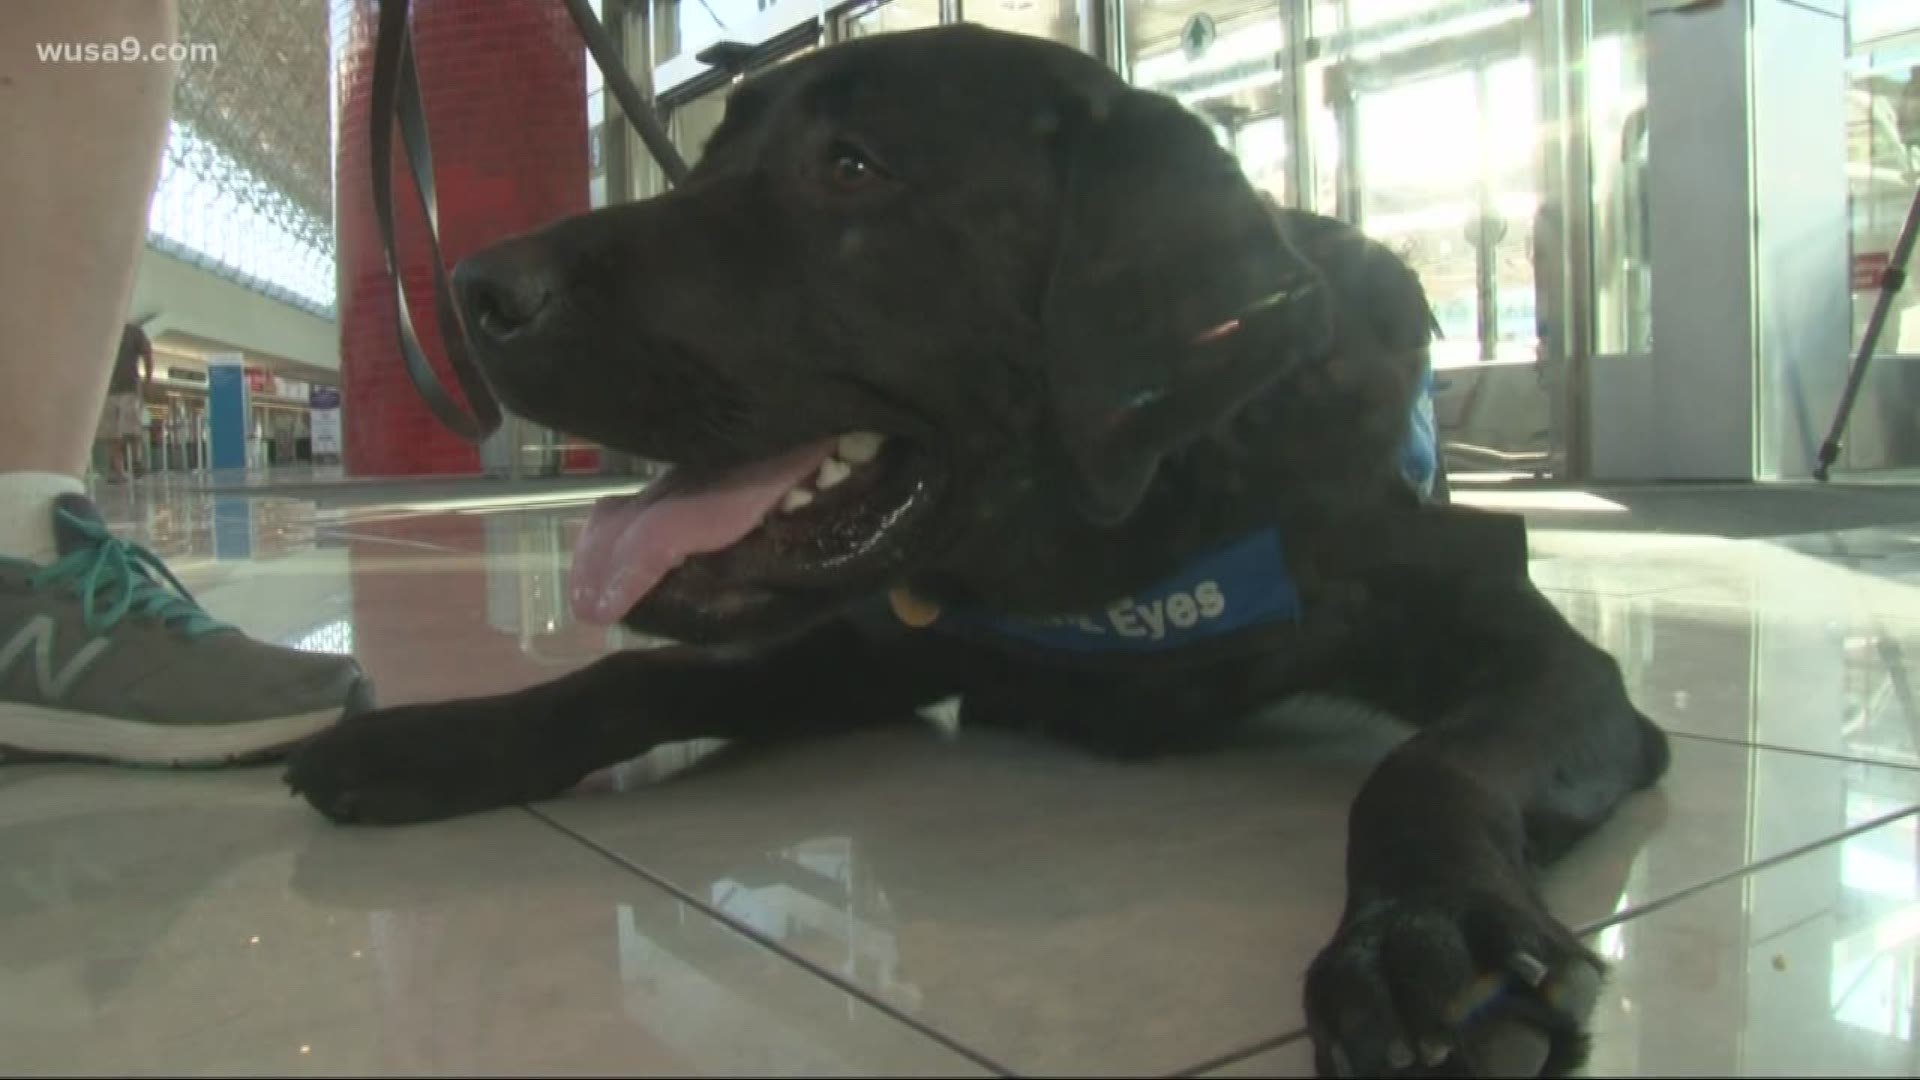 More than 25 service dogs in training got to experience the smells and sounds of BWI Thurgood Marshall International Airport. Many treats were had.